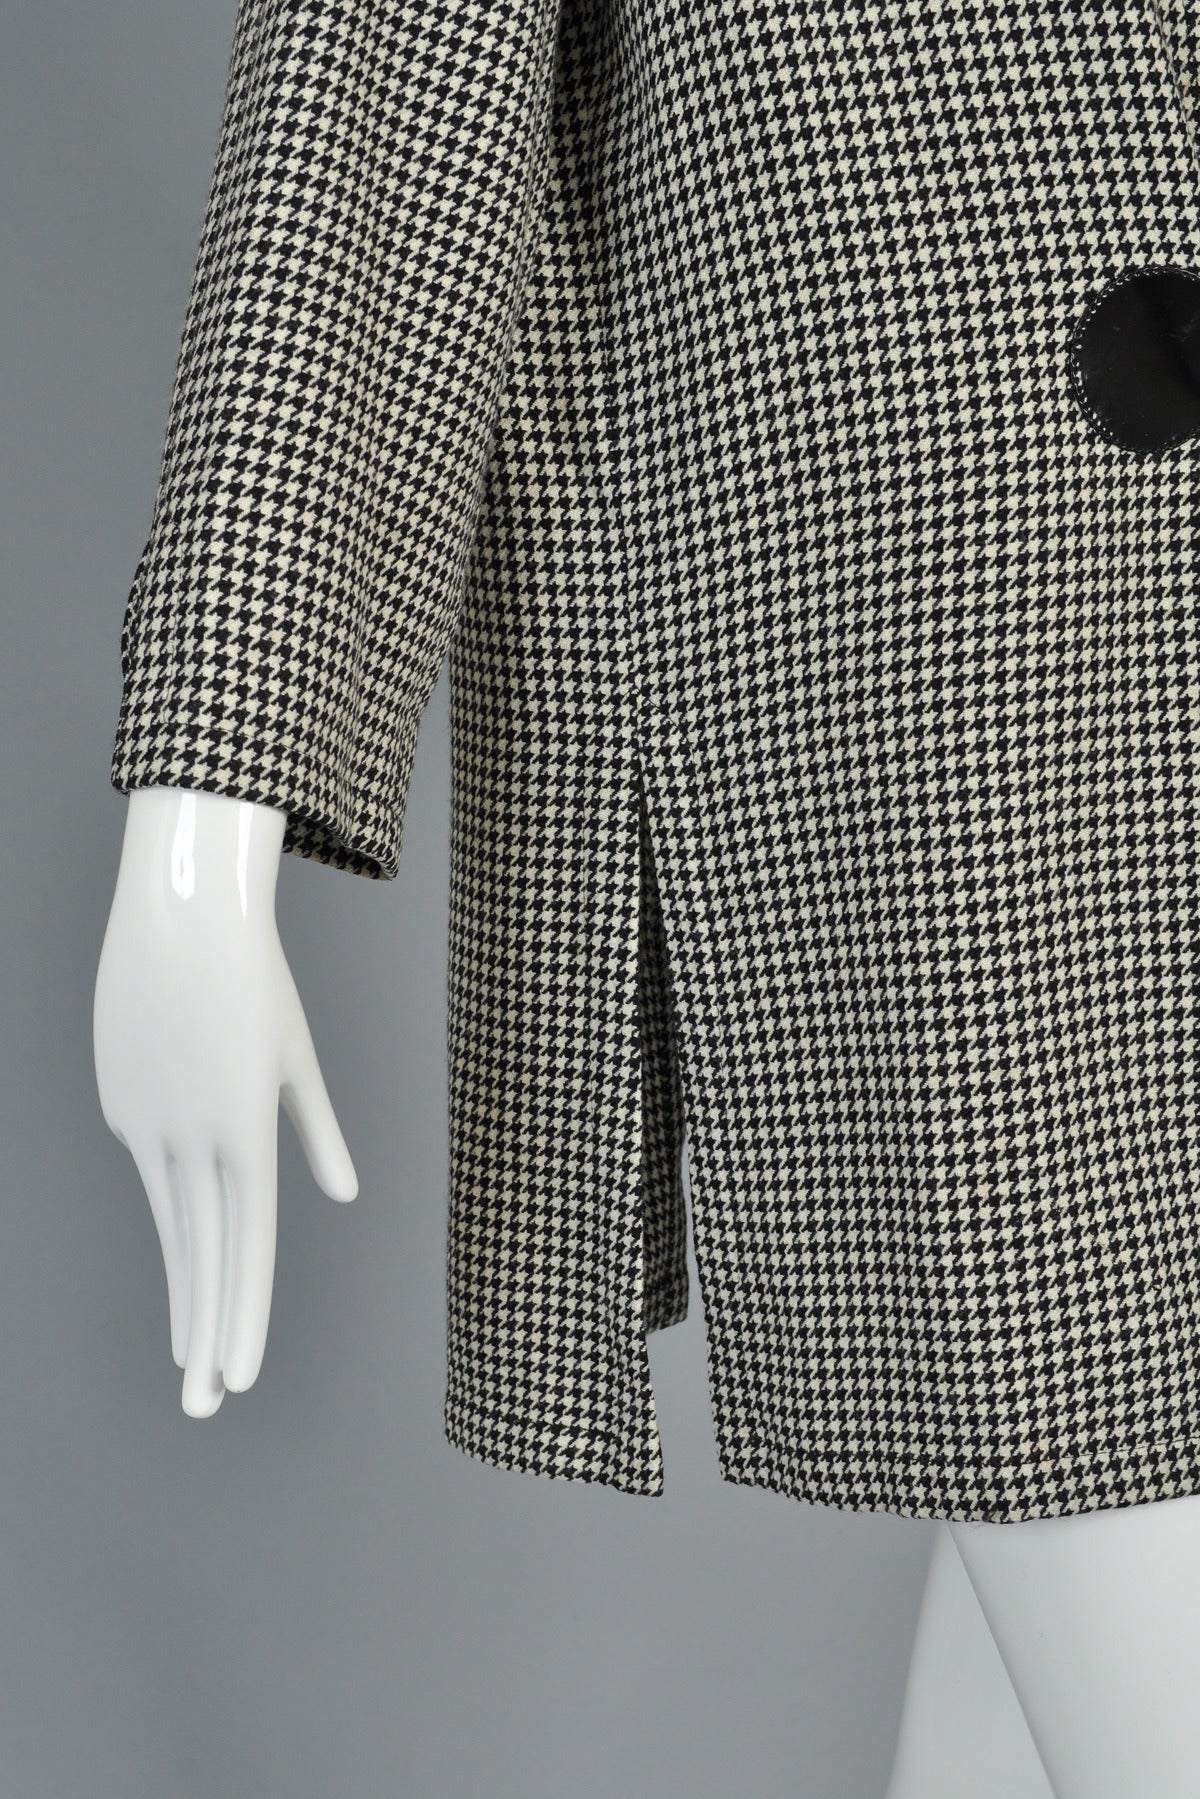 F/W 93 Pierre Cardin Haute Couture Houndstooth Vinyl Tie Jacket For Sale 2